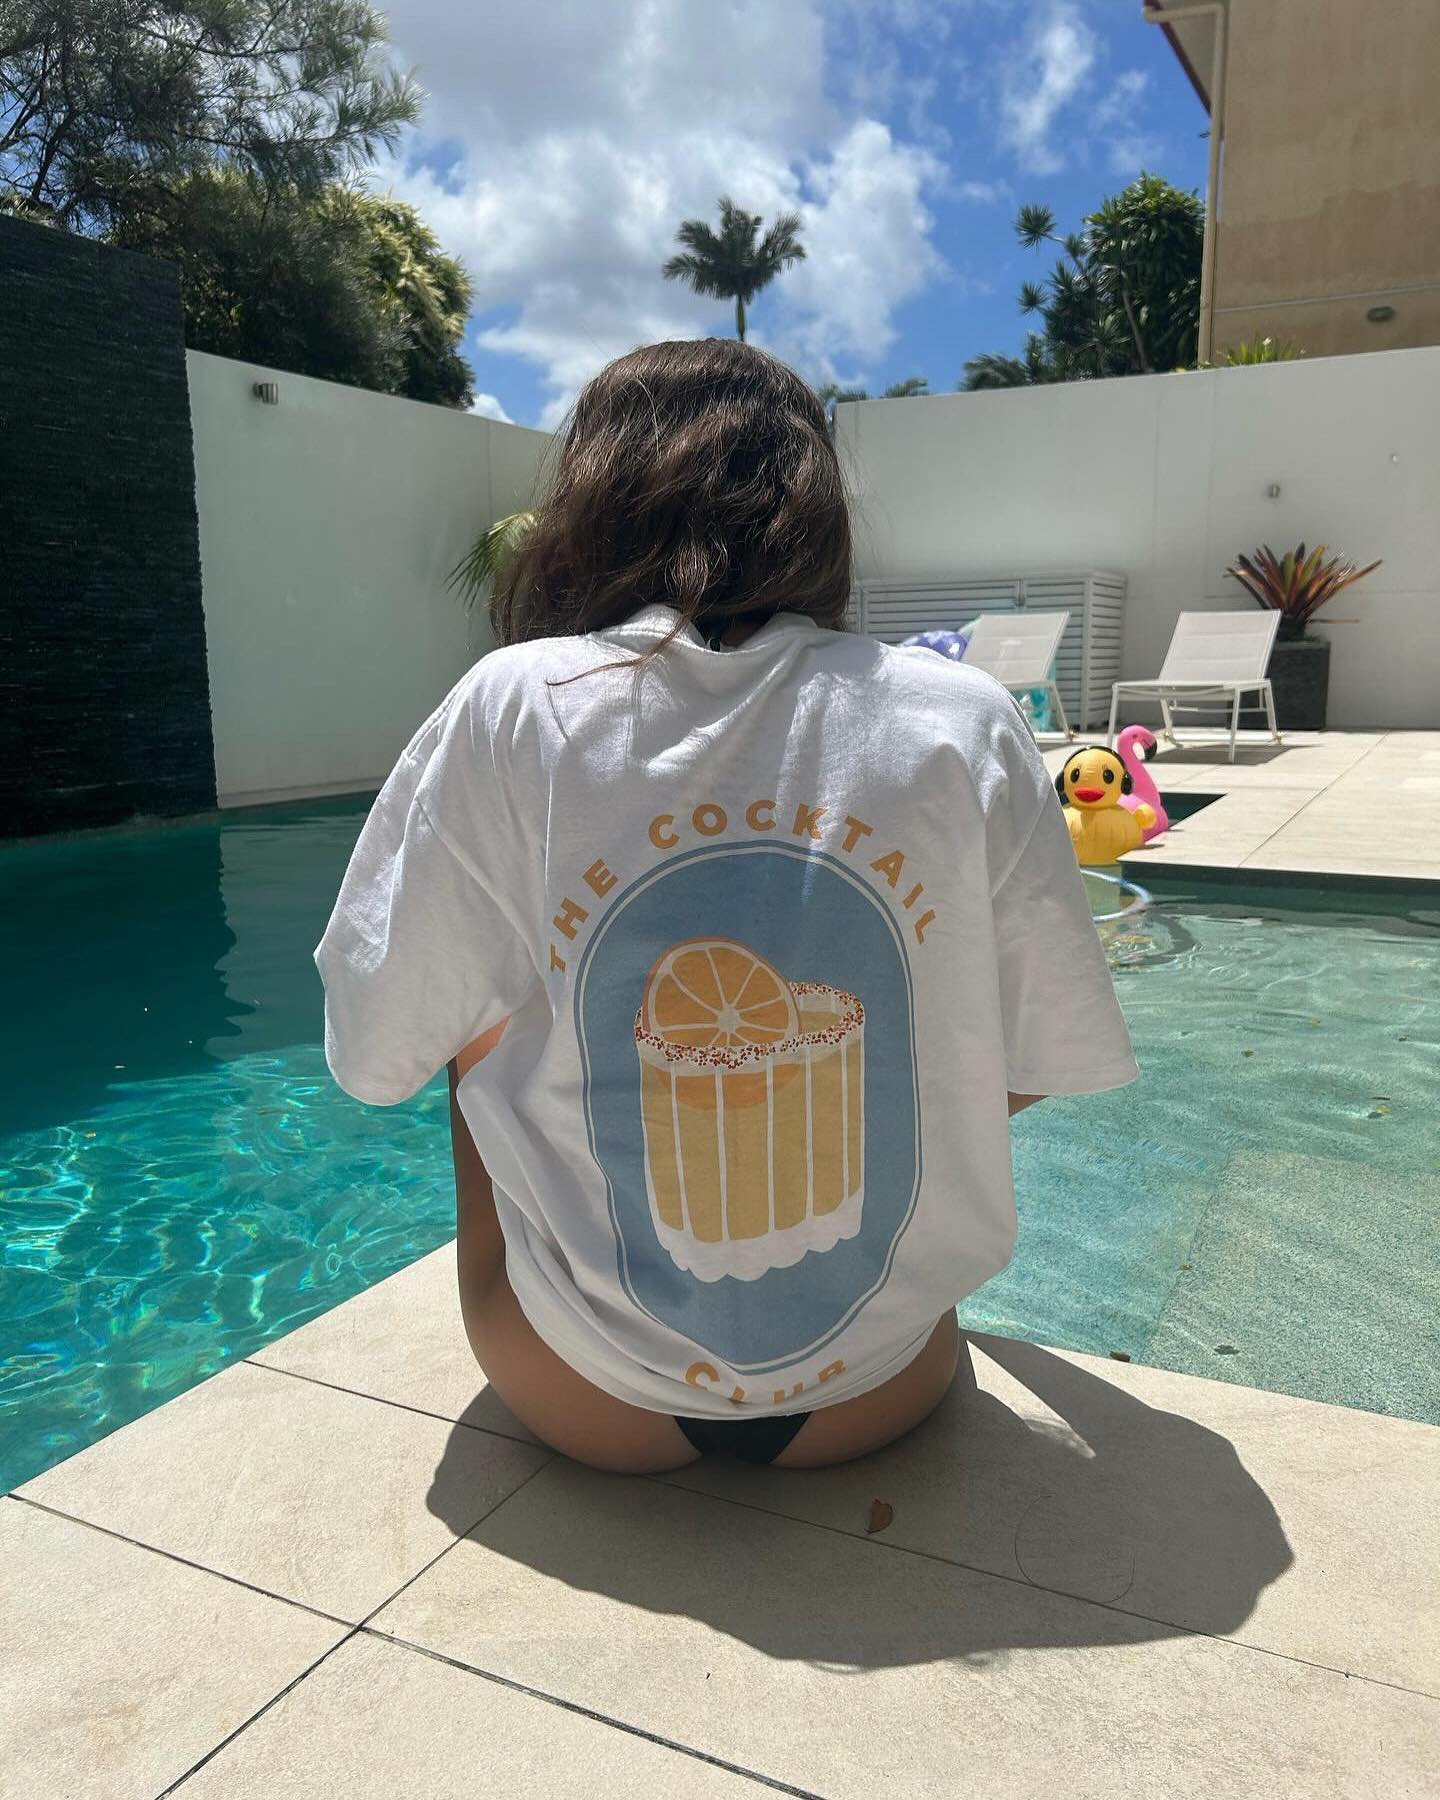 Wear your spirit on your sleeve with our cocktail club tees! 🥂

#joinourclub #thecocktailclub #oversizedtees